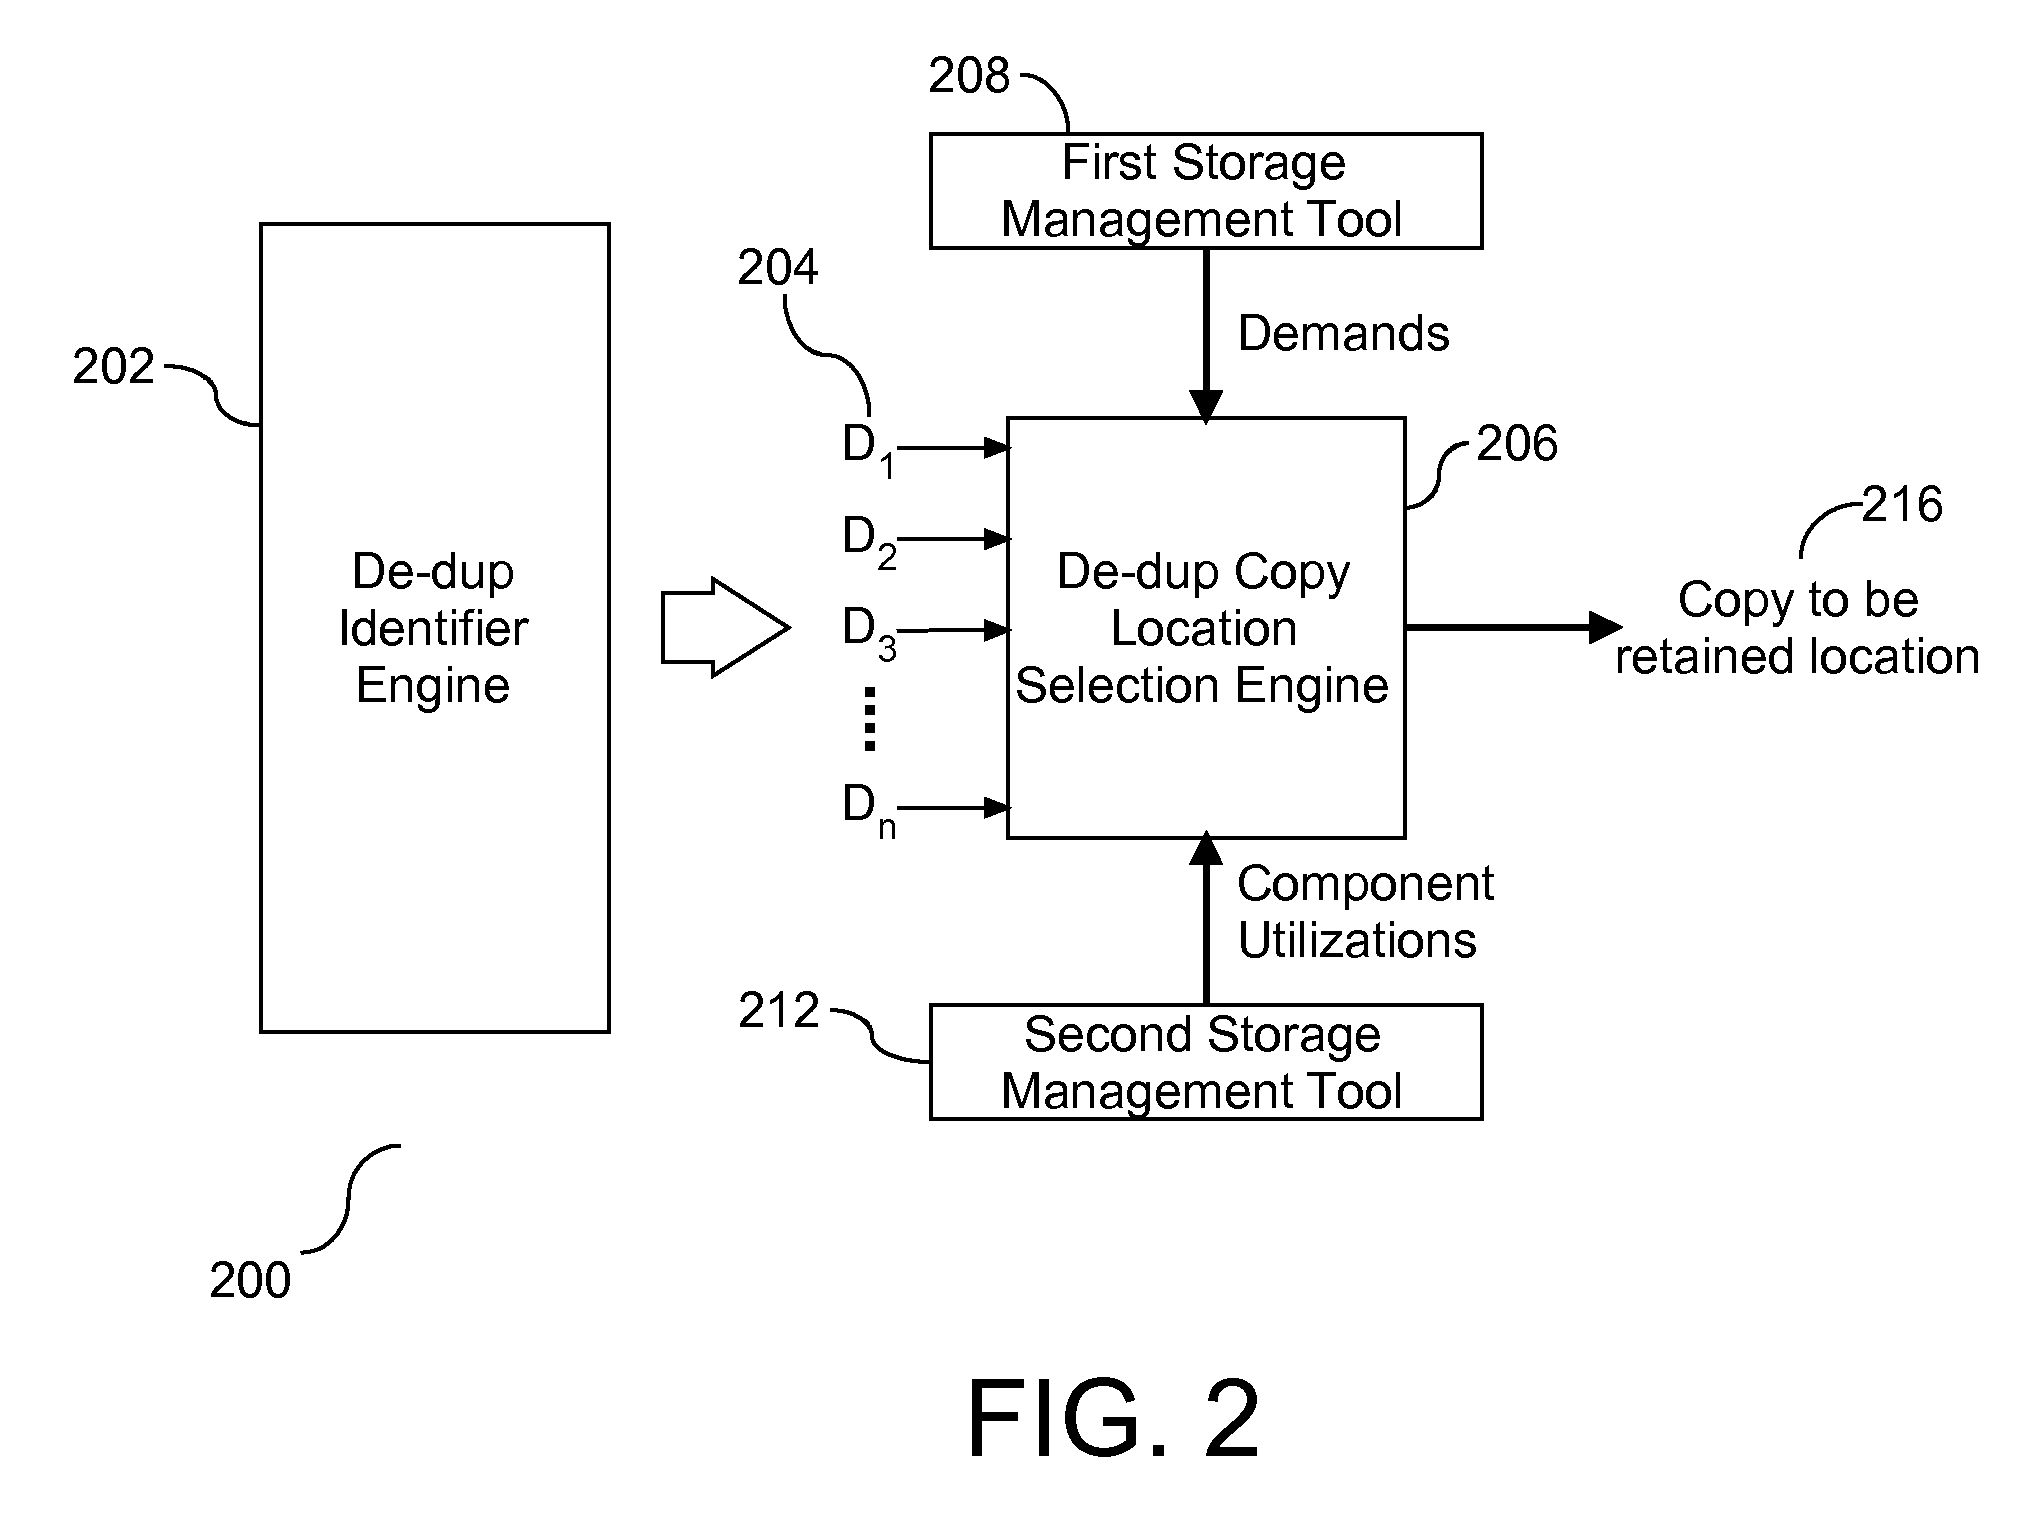 Method of Enhancing De-Duplication Impact by Preferential Selection of Master Copy to be Retained